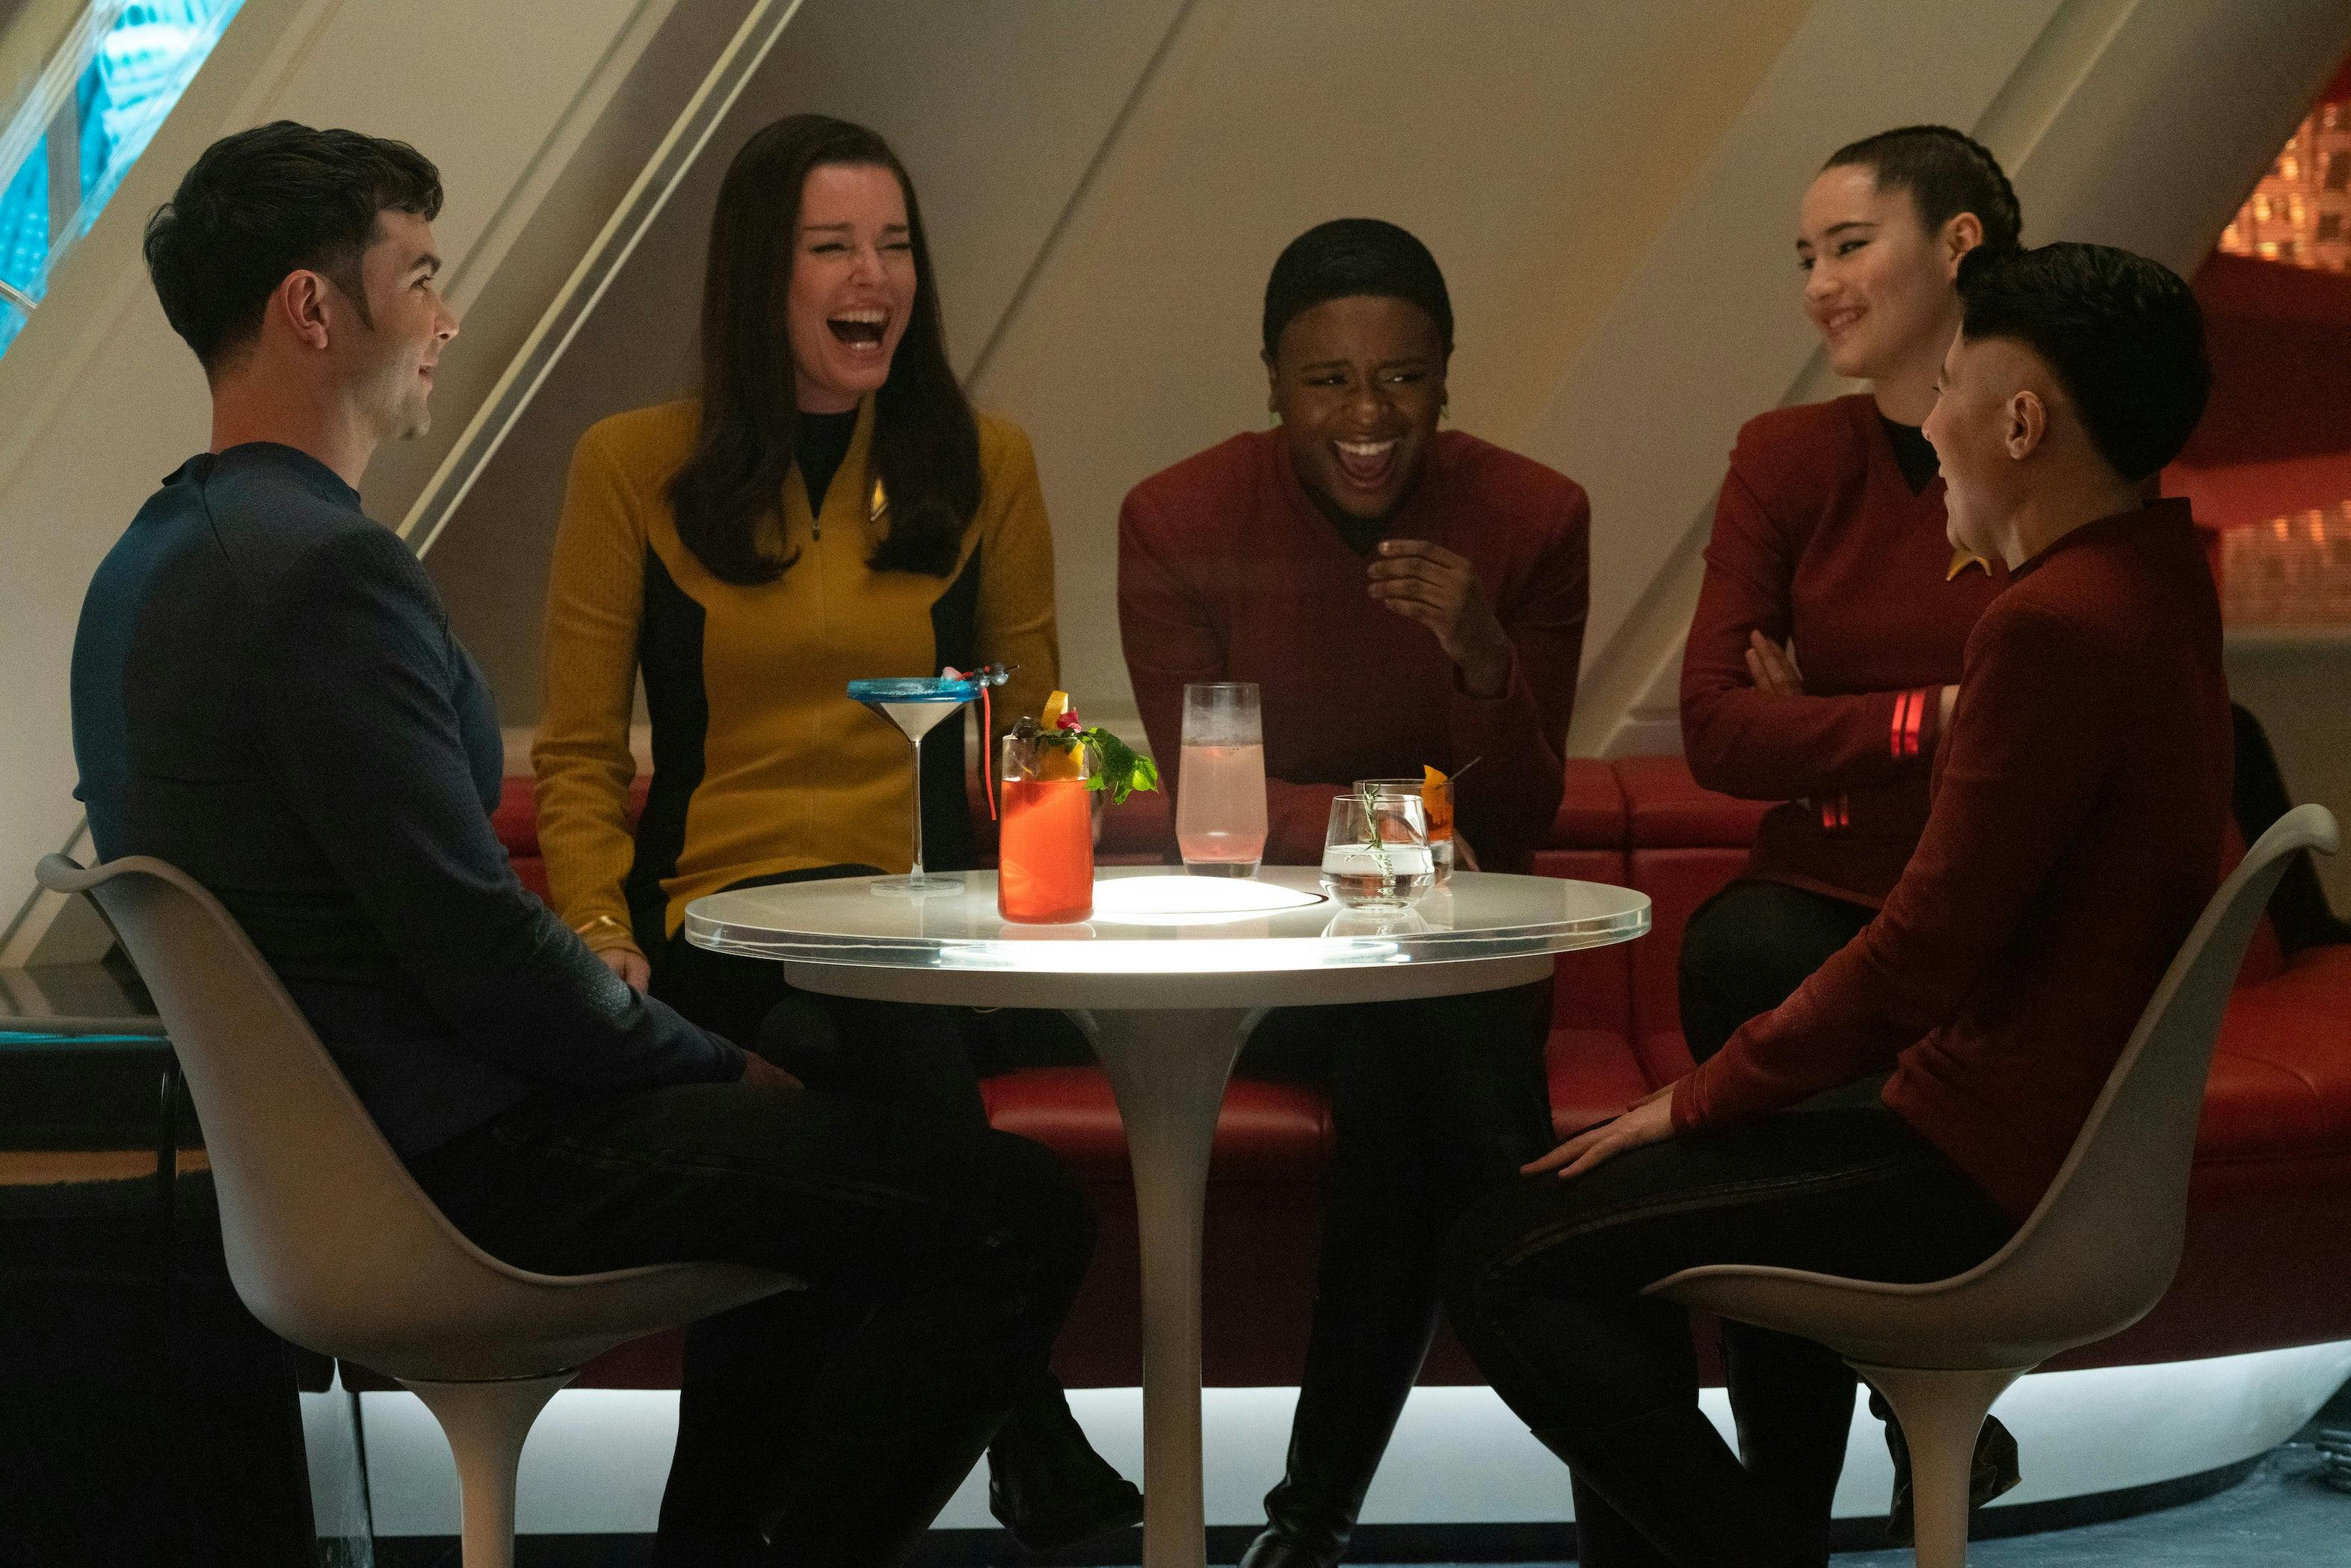 In the mess hall, Spock joins Number One/Una, Uhura, La'An, and Erica Ortegas as they laugh around a communal table in 'Charades'